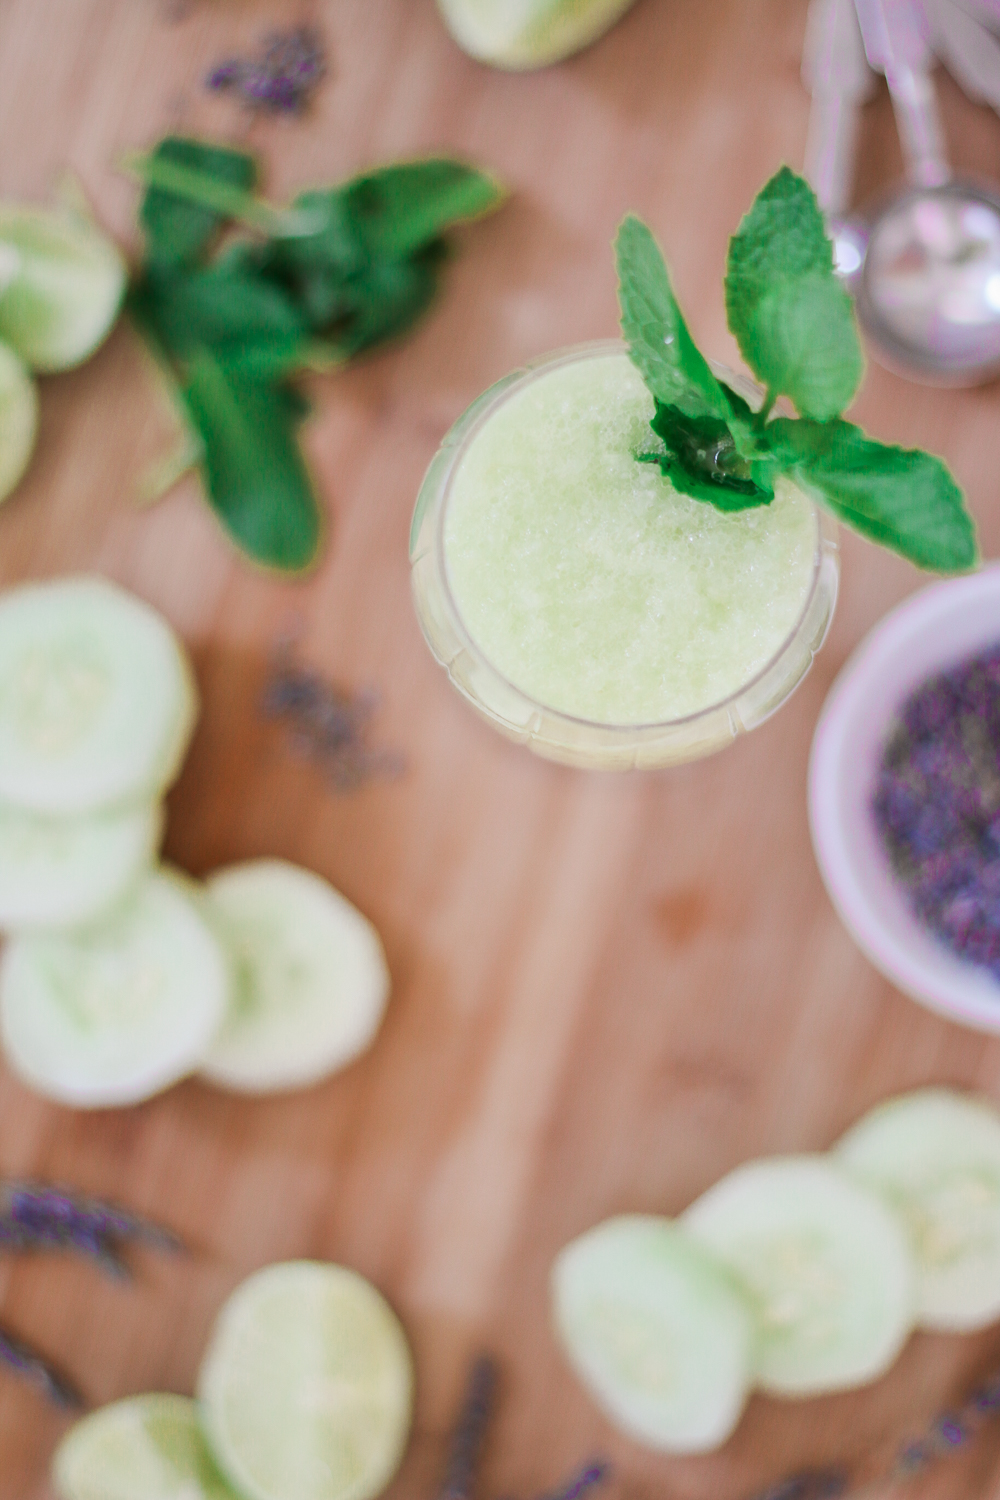 Cucumber Mocktail Recipe for Summer: Cucumber-Lime-Lavender Spritzer by southern lifestyle blogger Stephanie Ziajka from Diary of a Debutante, cucumber mocktail recipes, edible lavender cocktail recipe, Cooking Light mocktail recipes, summer mocktail ideas